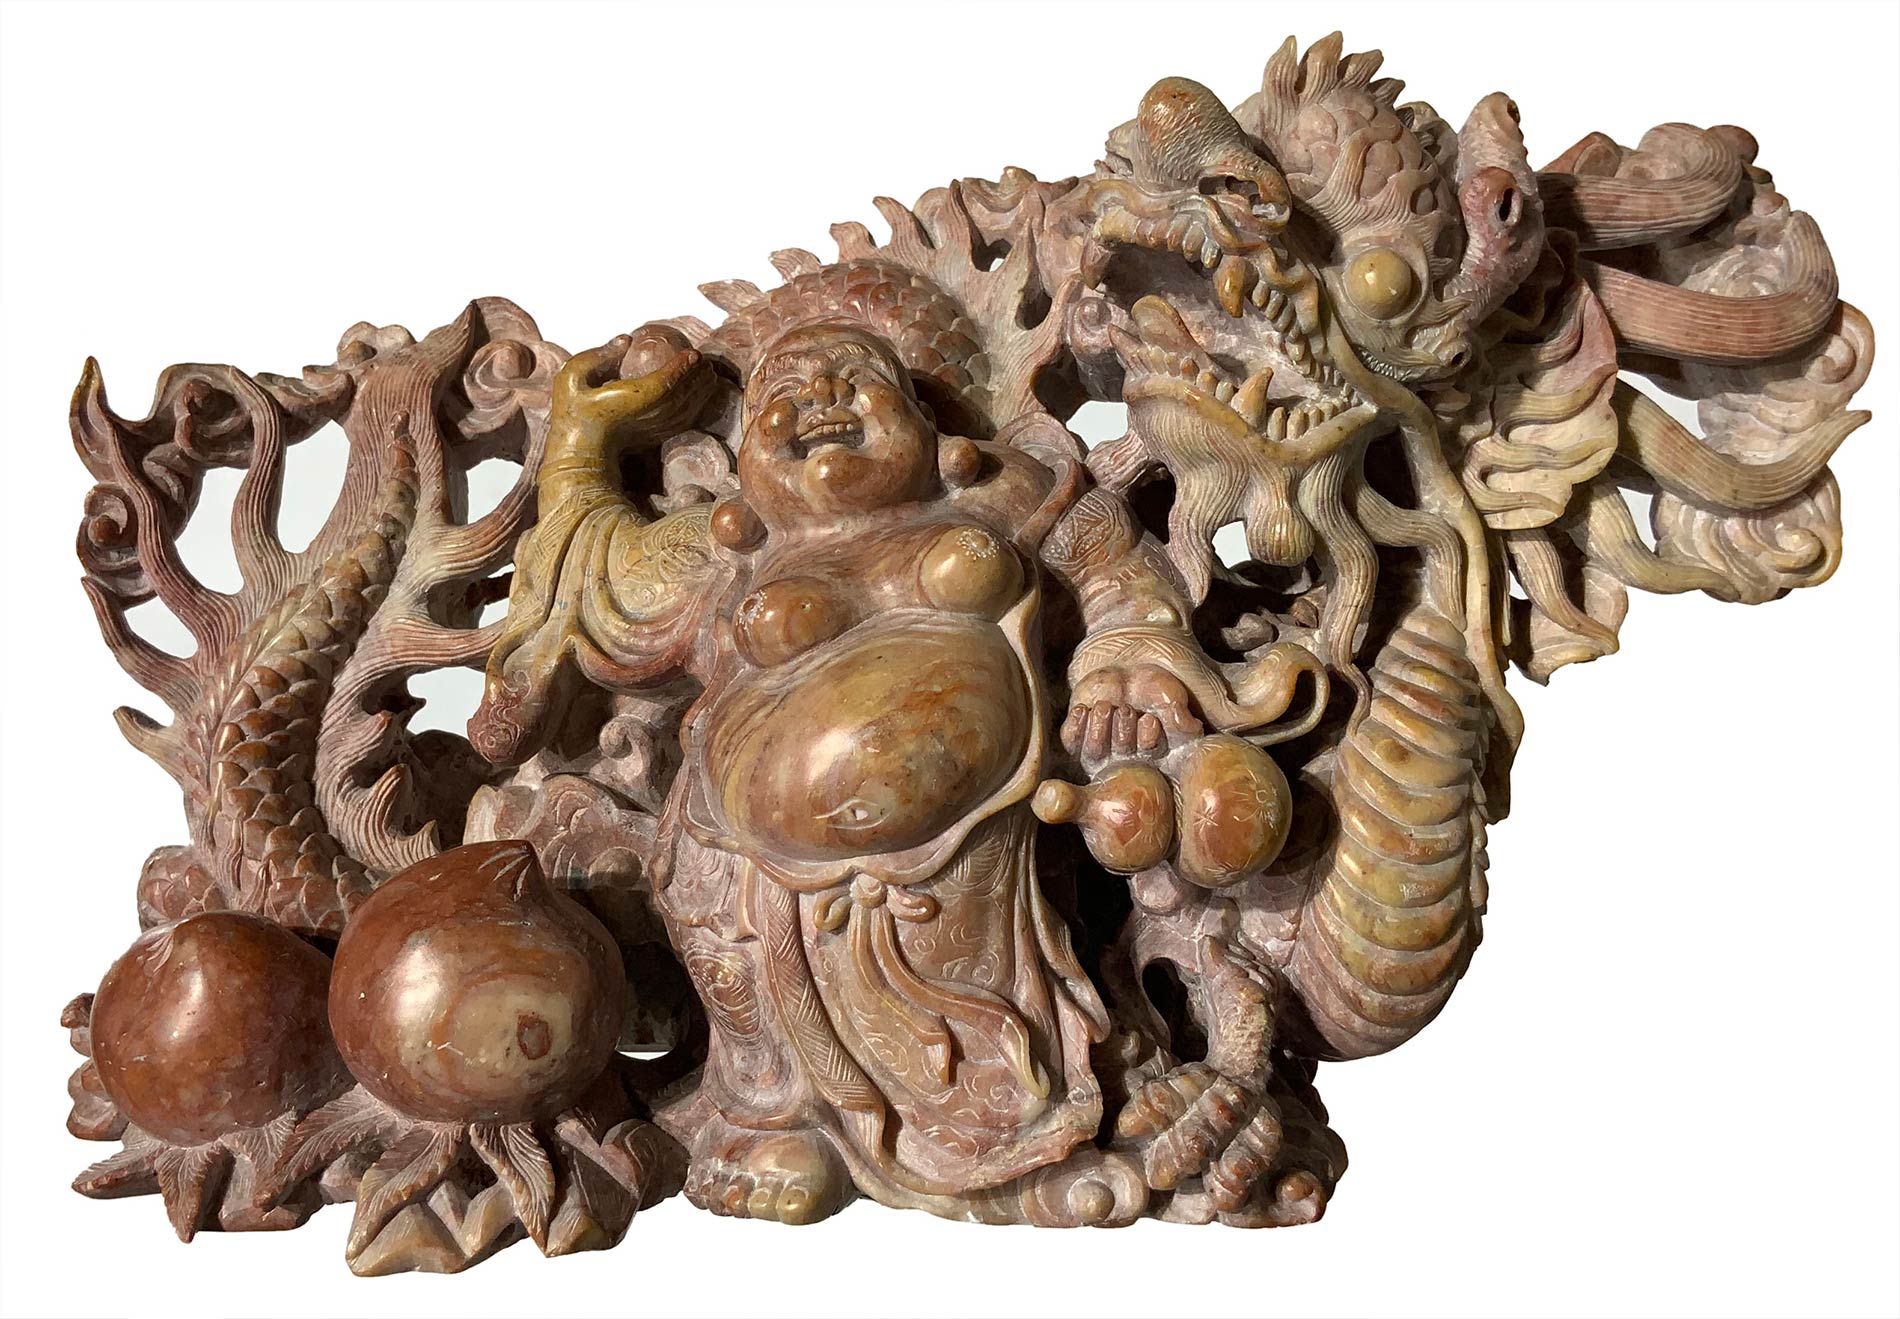 Sophisticated and detailed stone carving soapstone depicting Budai with dragon, fruit and clouds.